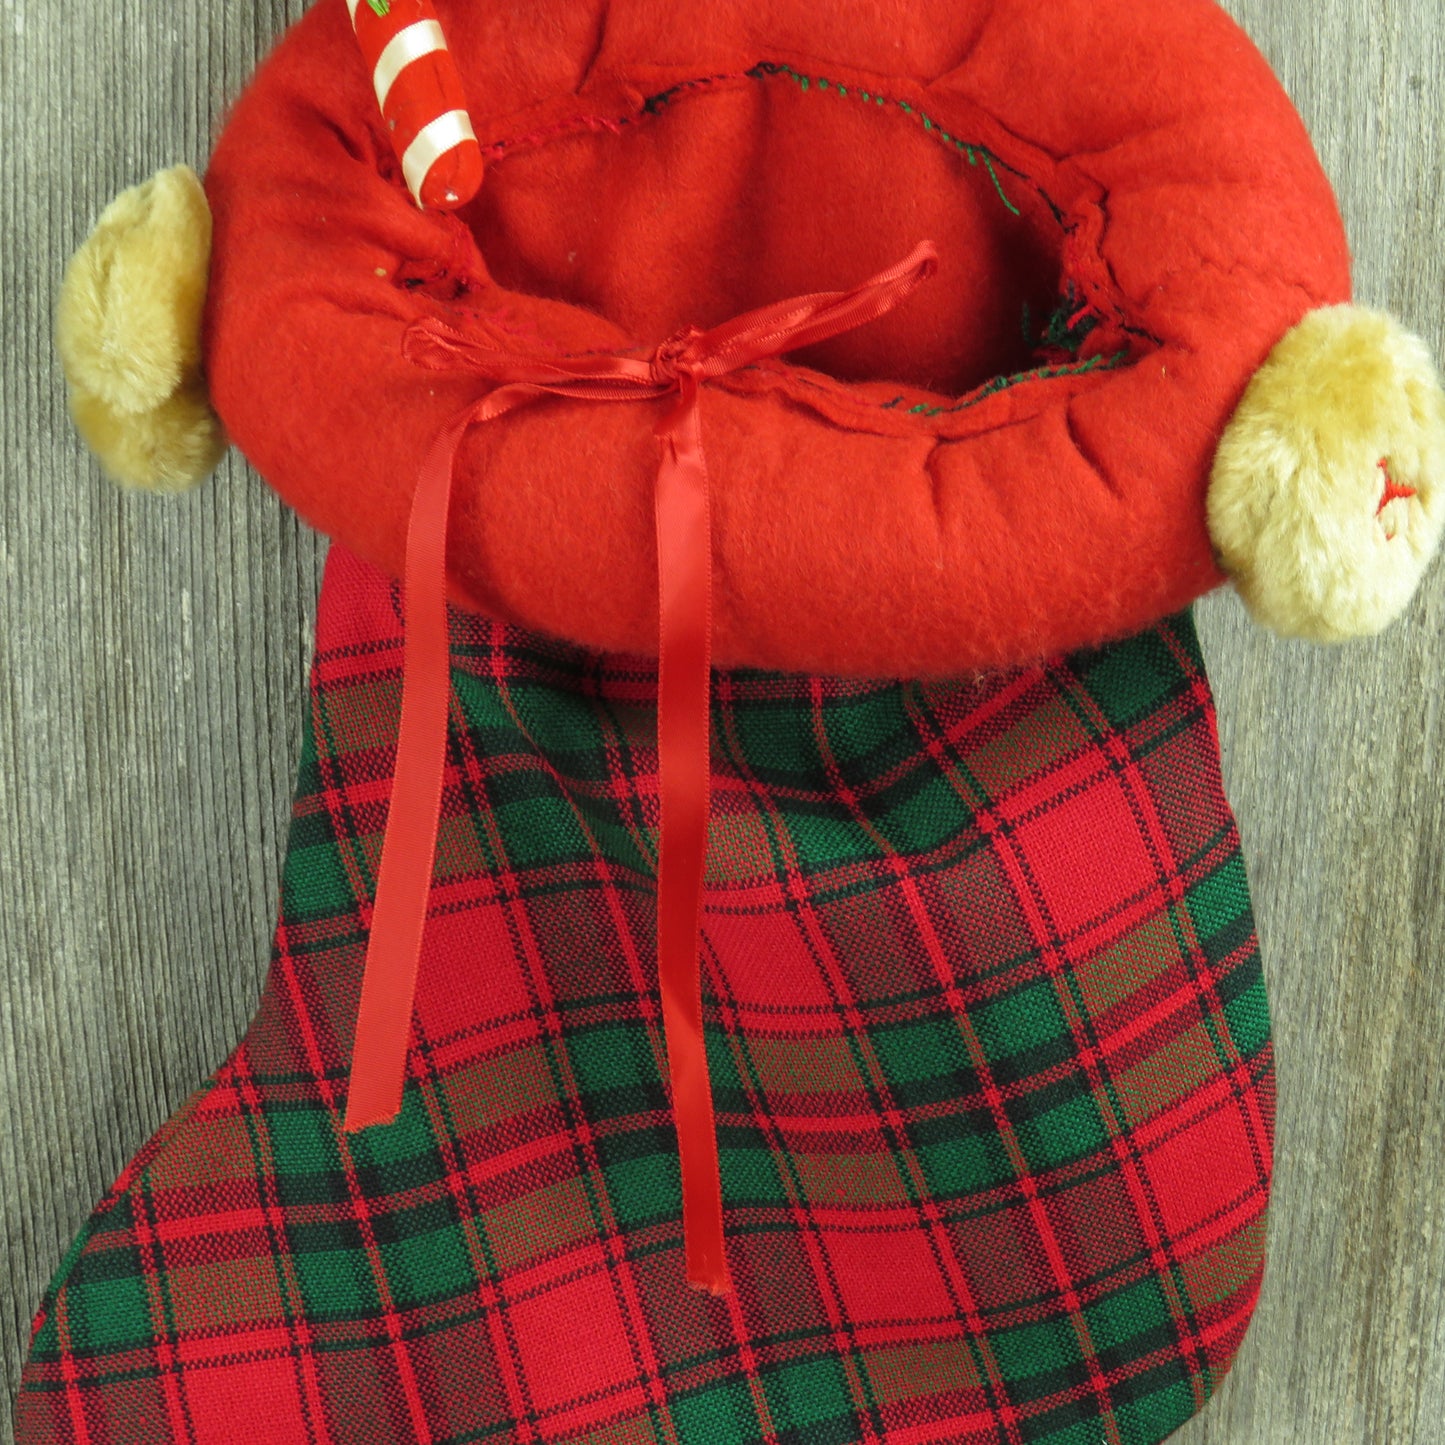 Vintage Teddy Bear Plaid Plush Christmas Stocking Red Green Candy Cane - At Grandma's Table